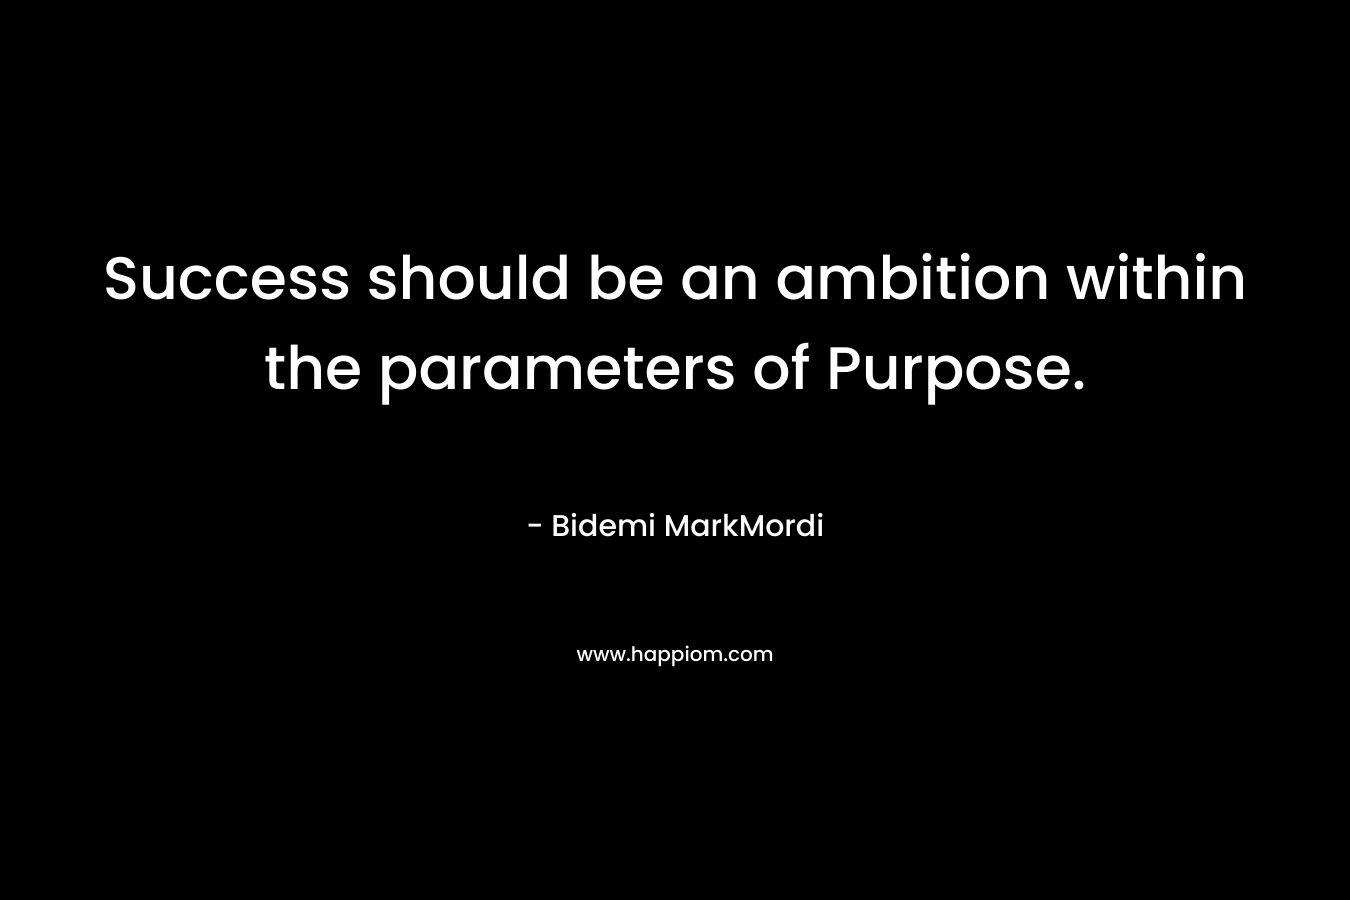 Success should be an ambition within the parameters of Purpose.